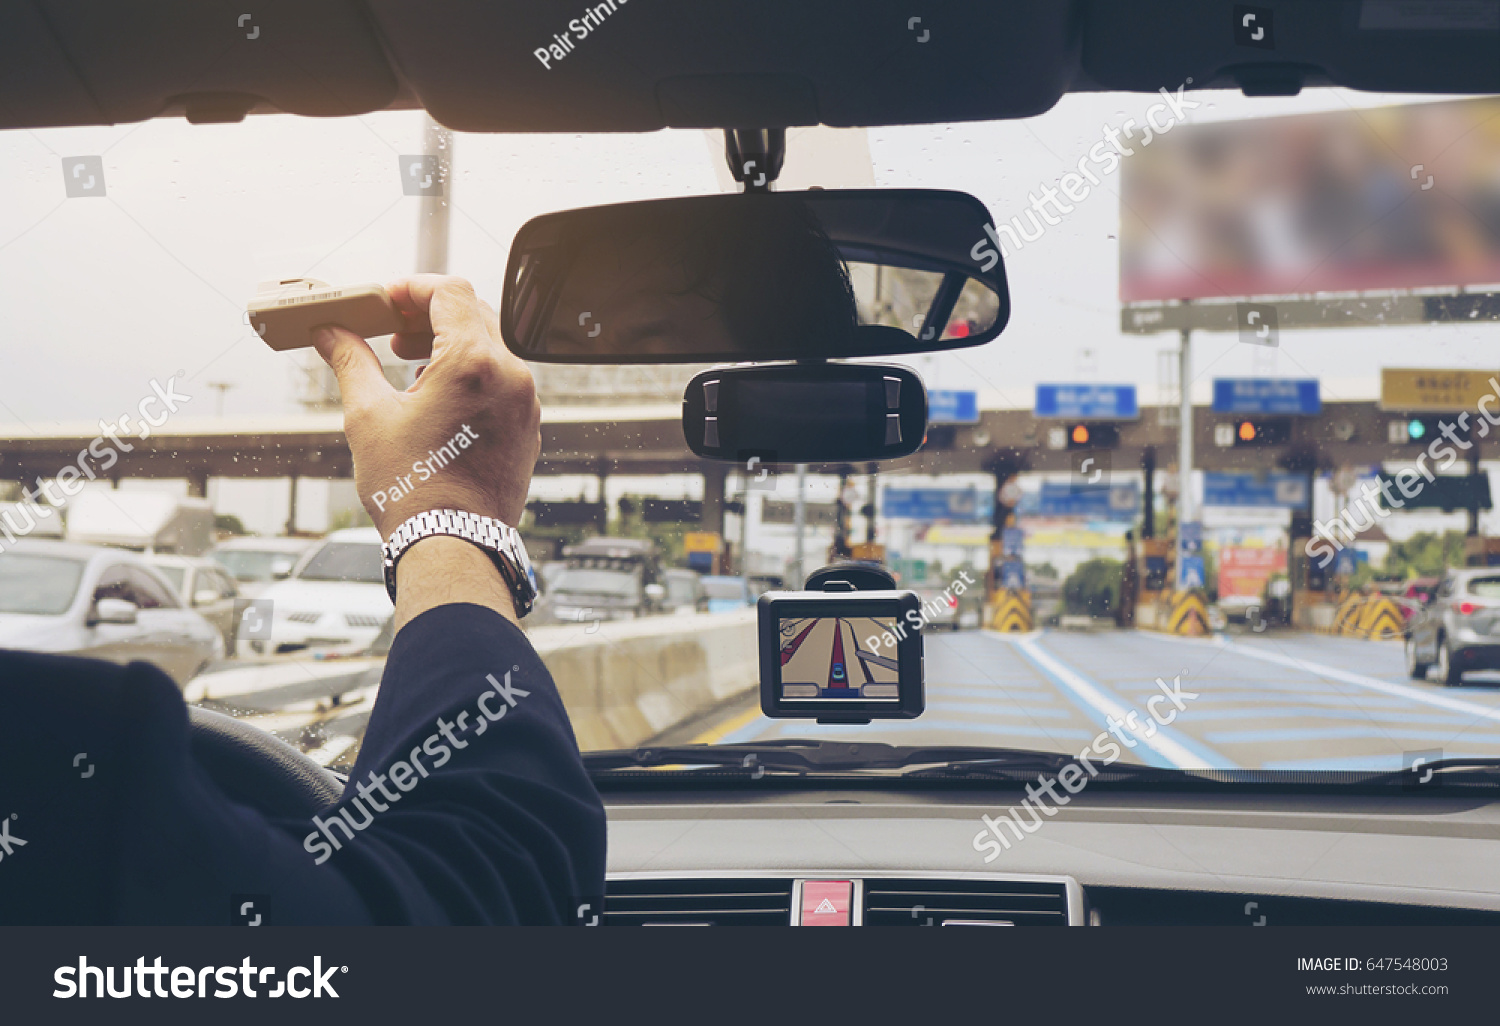 Man driving car using navigator and holding electronic toll collection system device #647548003